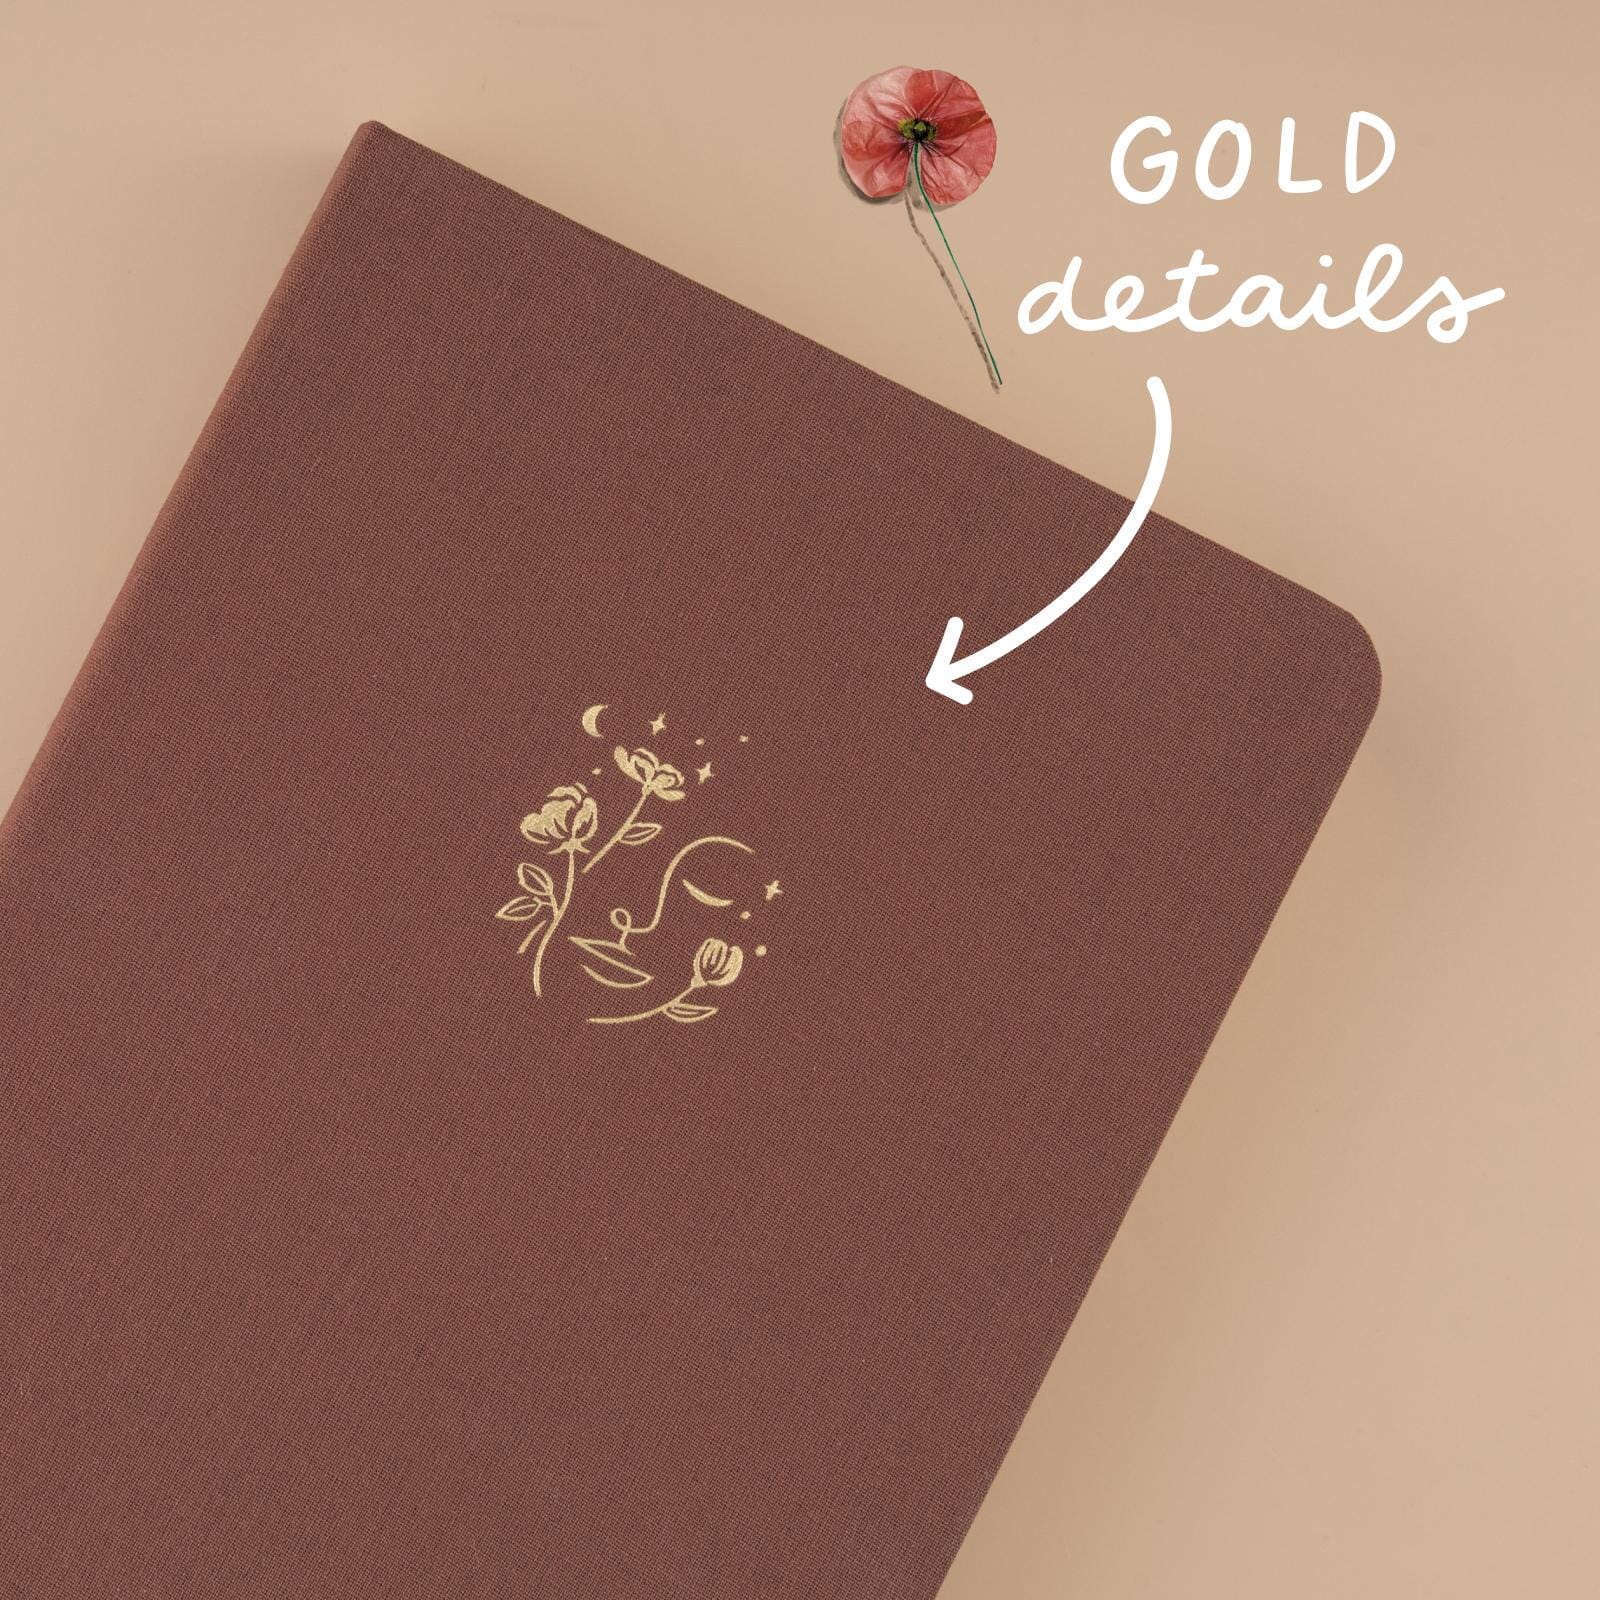 Tsuki ‘Dried Flowers’ Limited Edition Luxury Bullet Journal ☾